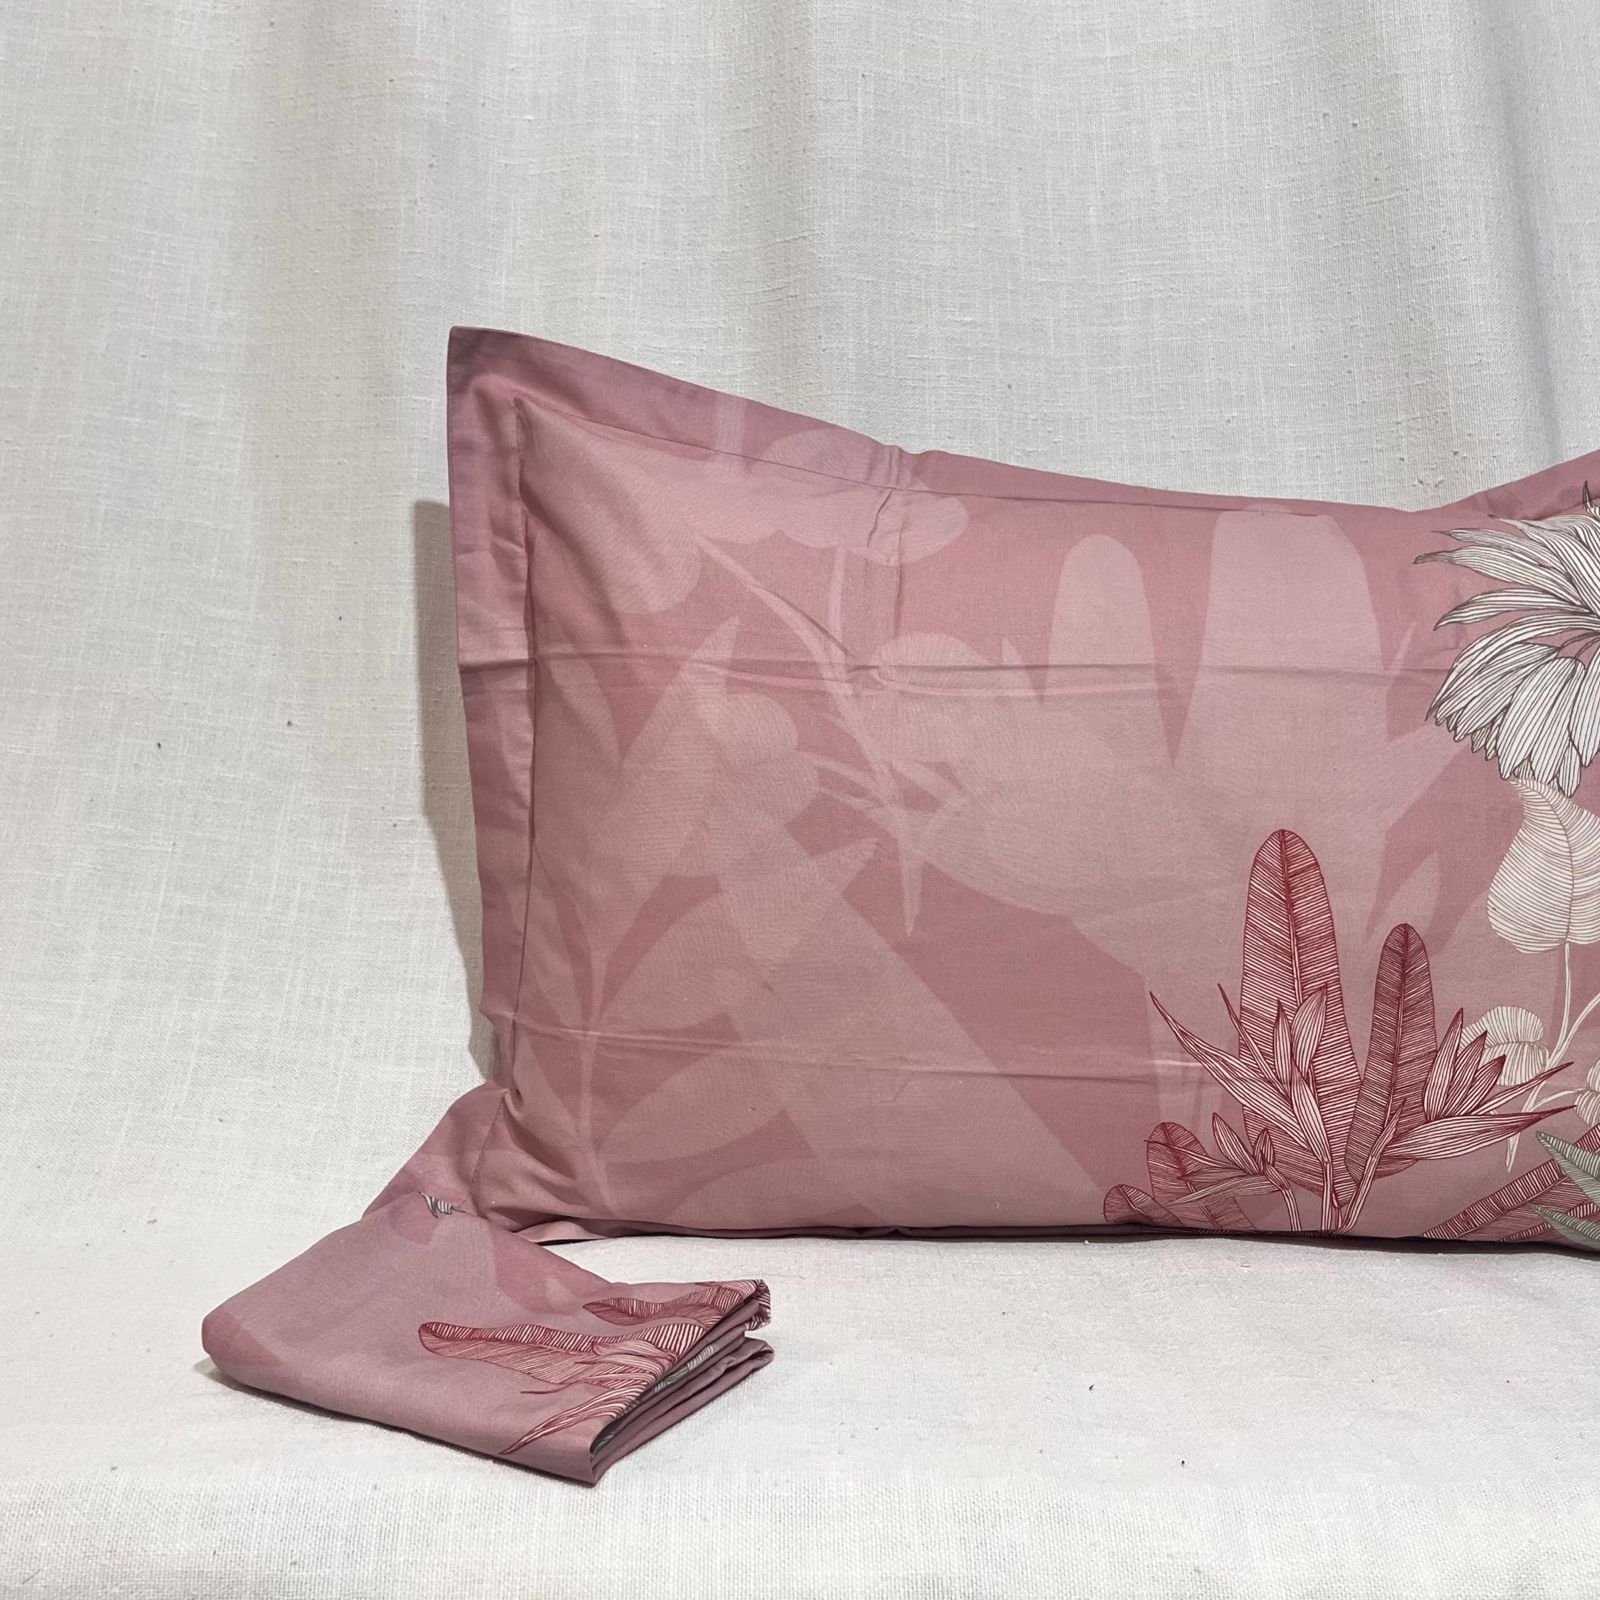 Pillow Cover with size of 43cm x 68cm (17" x 27")